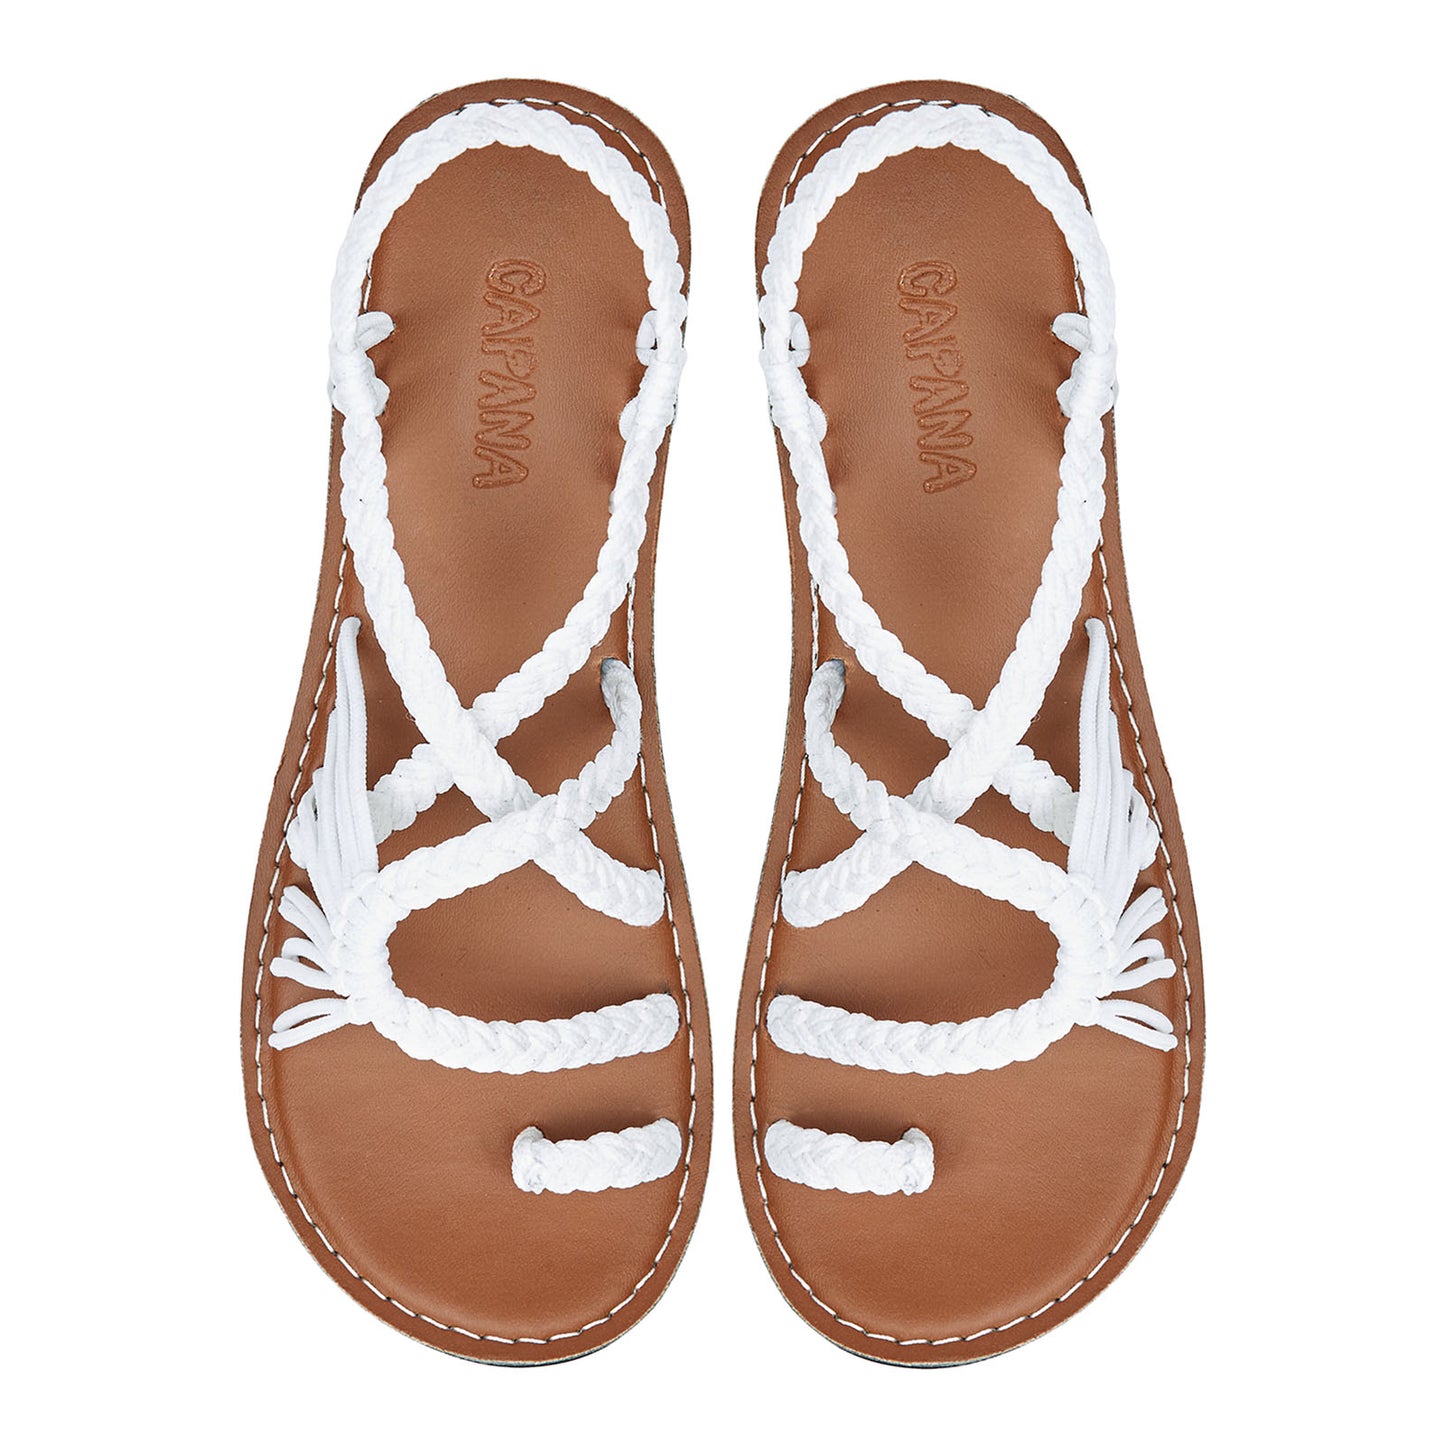 Commune White Rope Sandals Pure White loop design Flat sandals for women